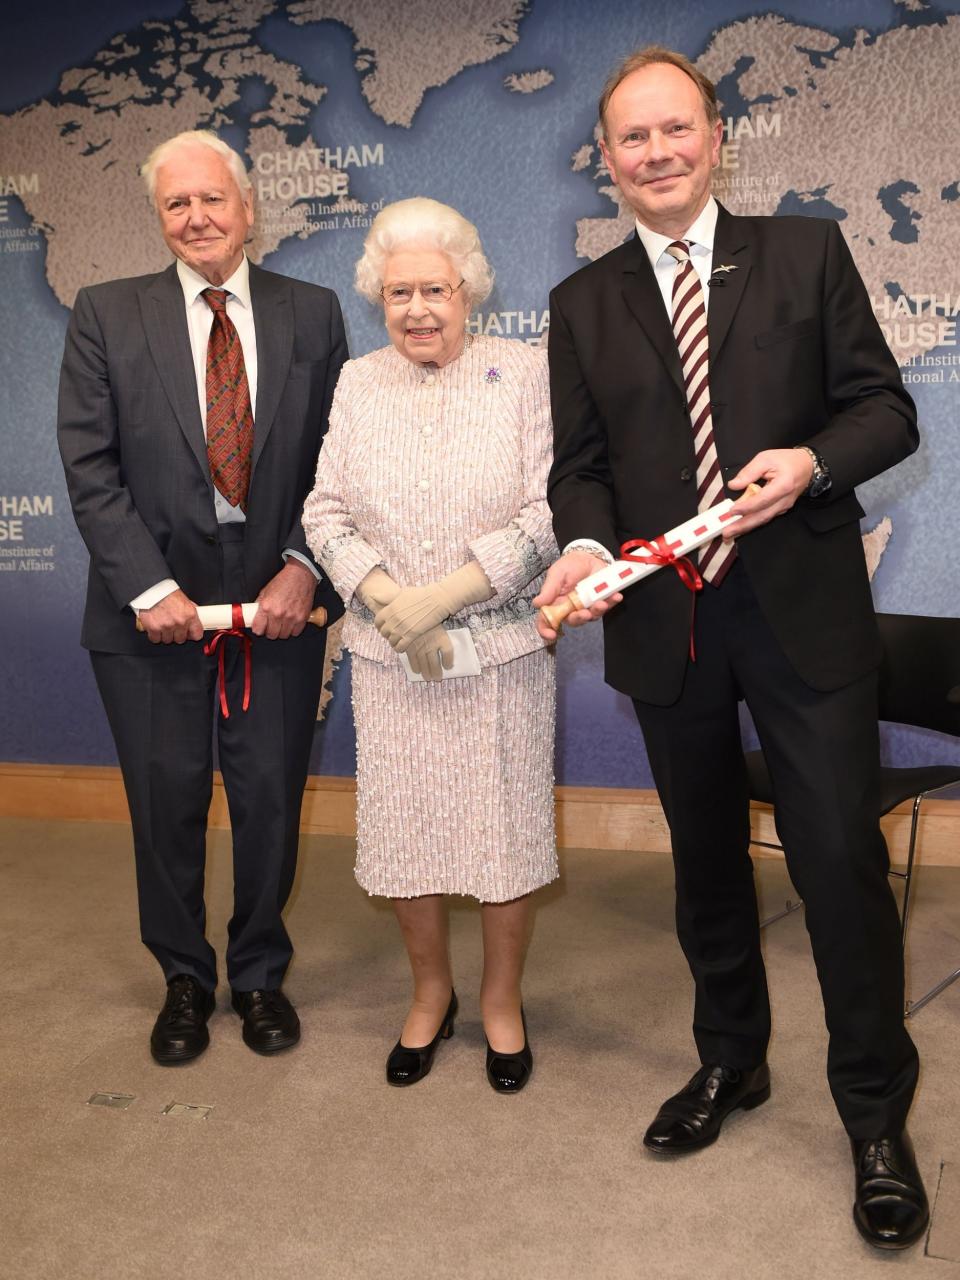 The Queen presents the Chatham House Prize to Sir David Attenborough and head of the BBC's Natural History Unit, Julian Hector (POOL/AFP via Getty Images)